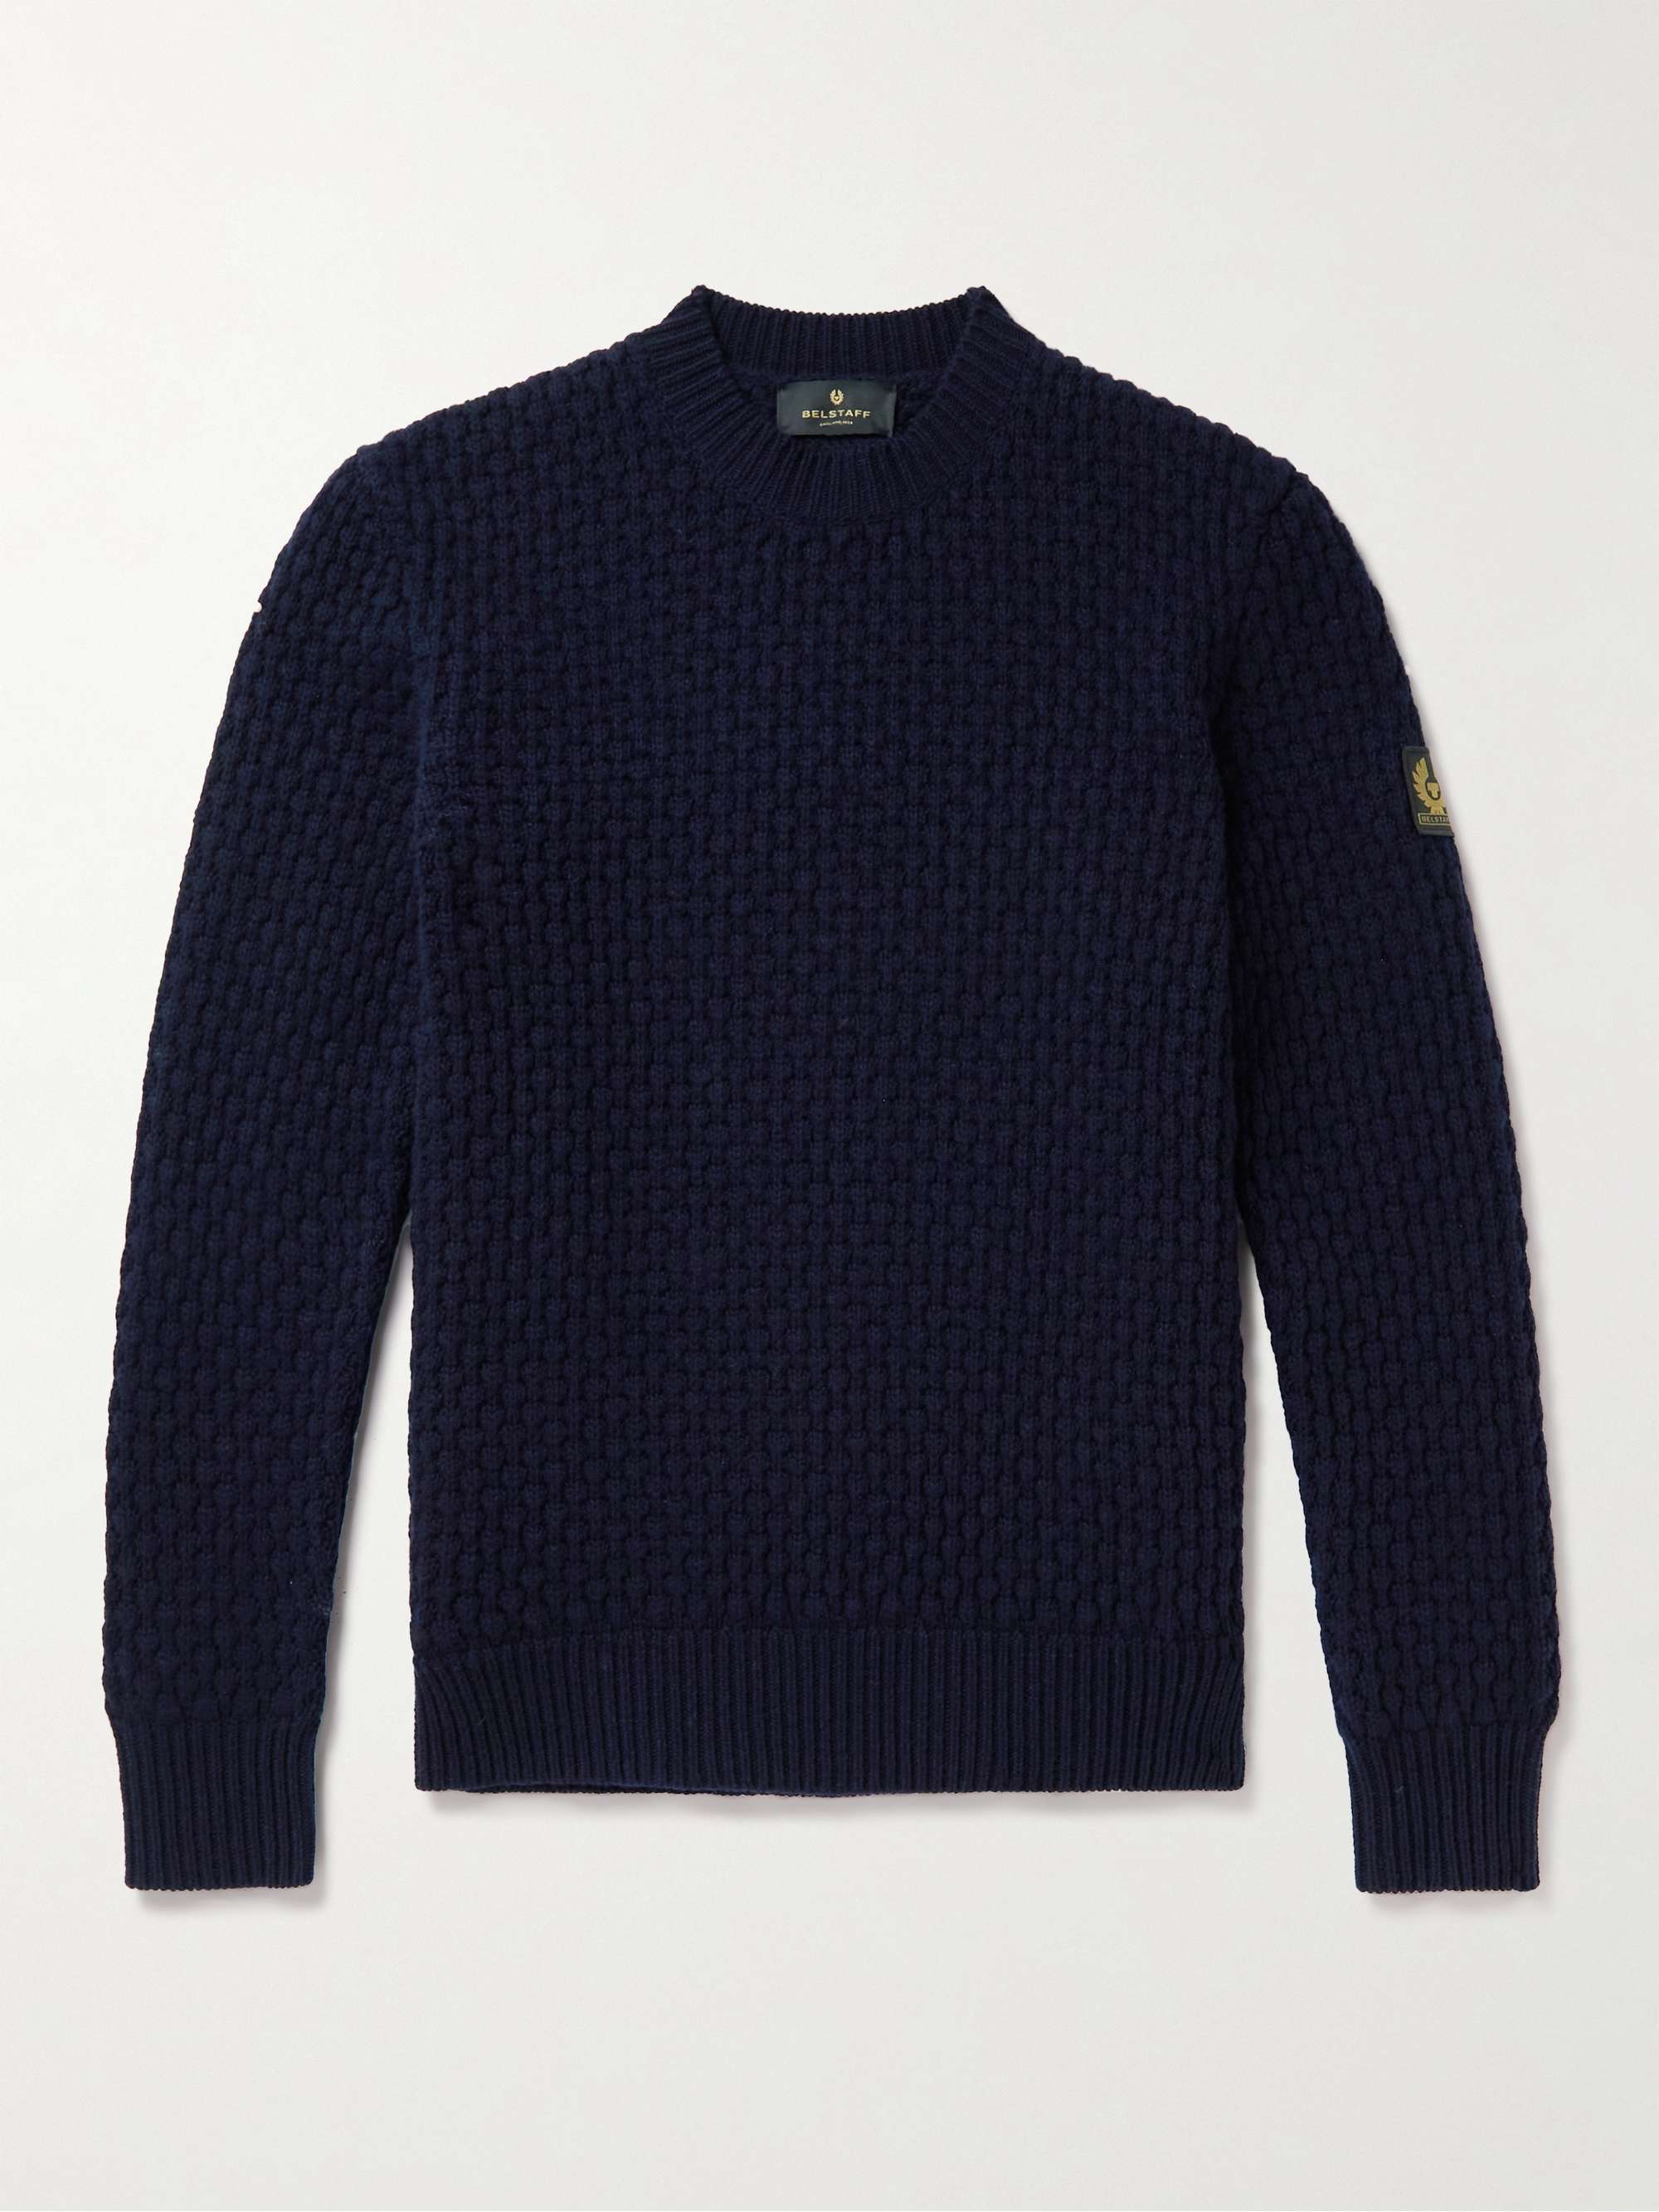 BELSTAFF Submarine Cable-Knit Wool Sweater | MR PORTER